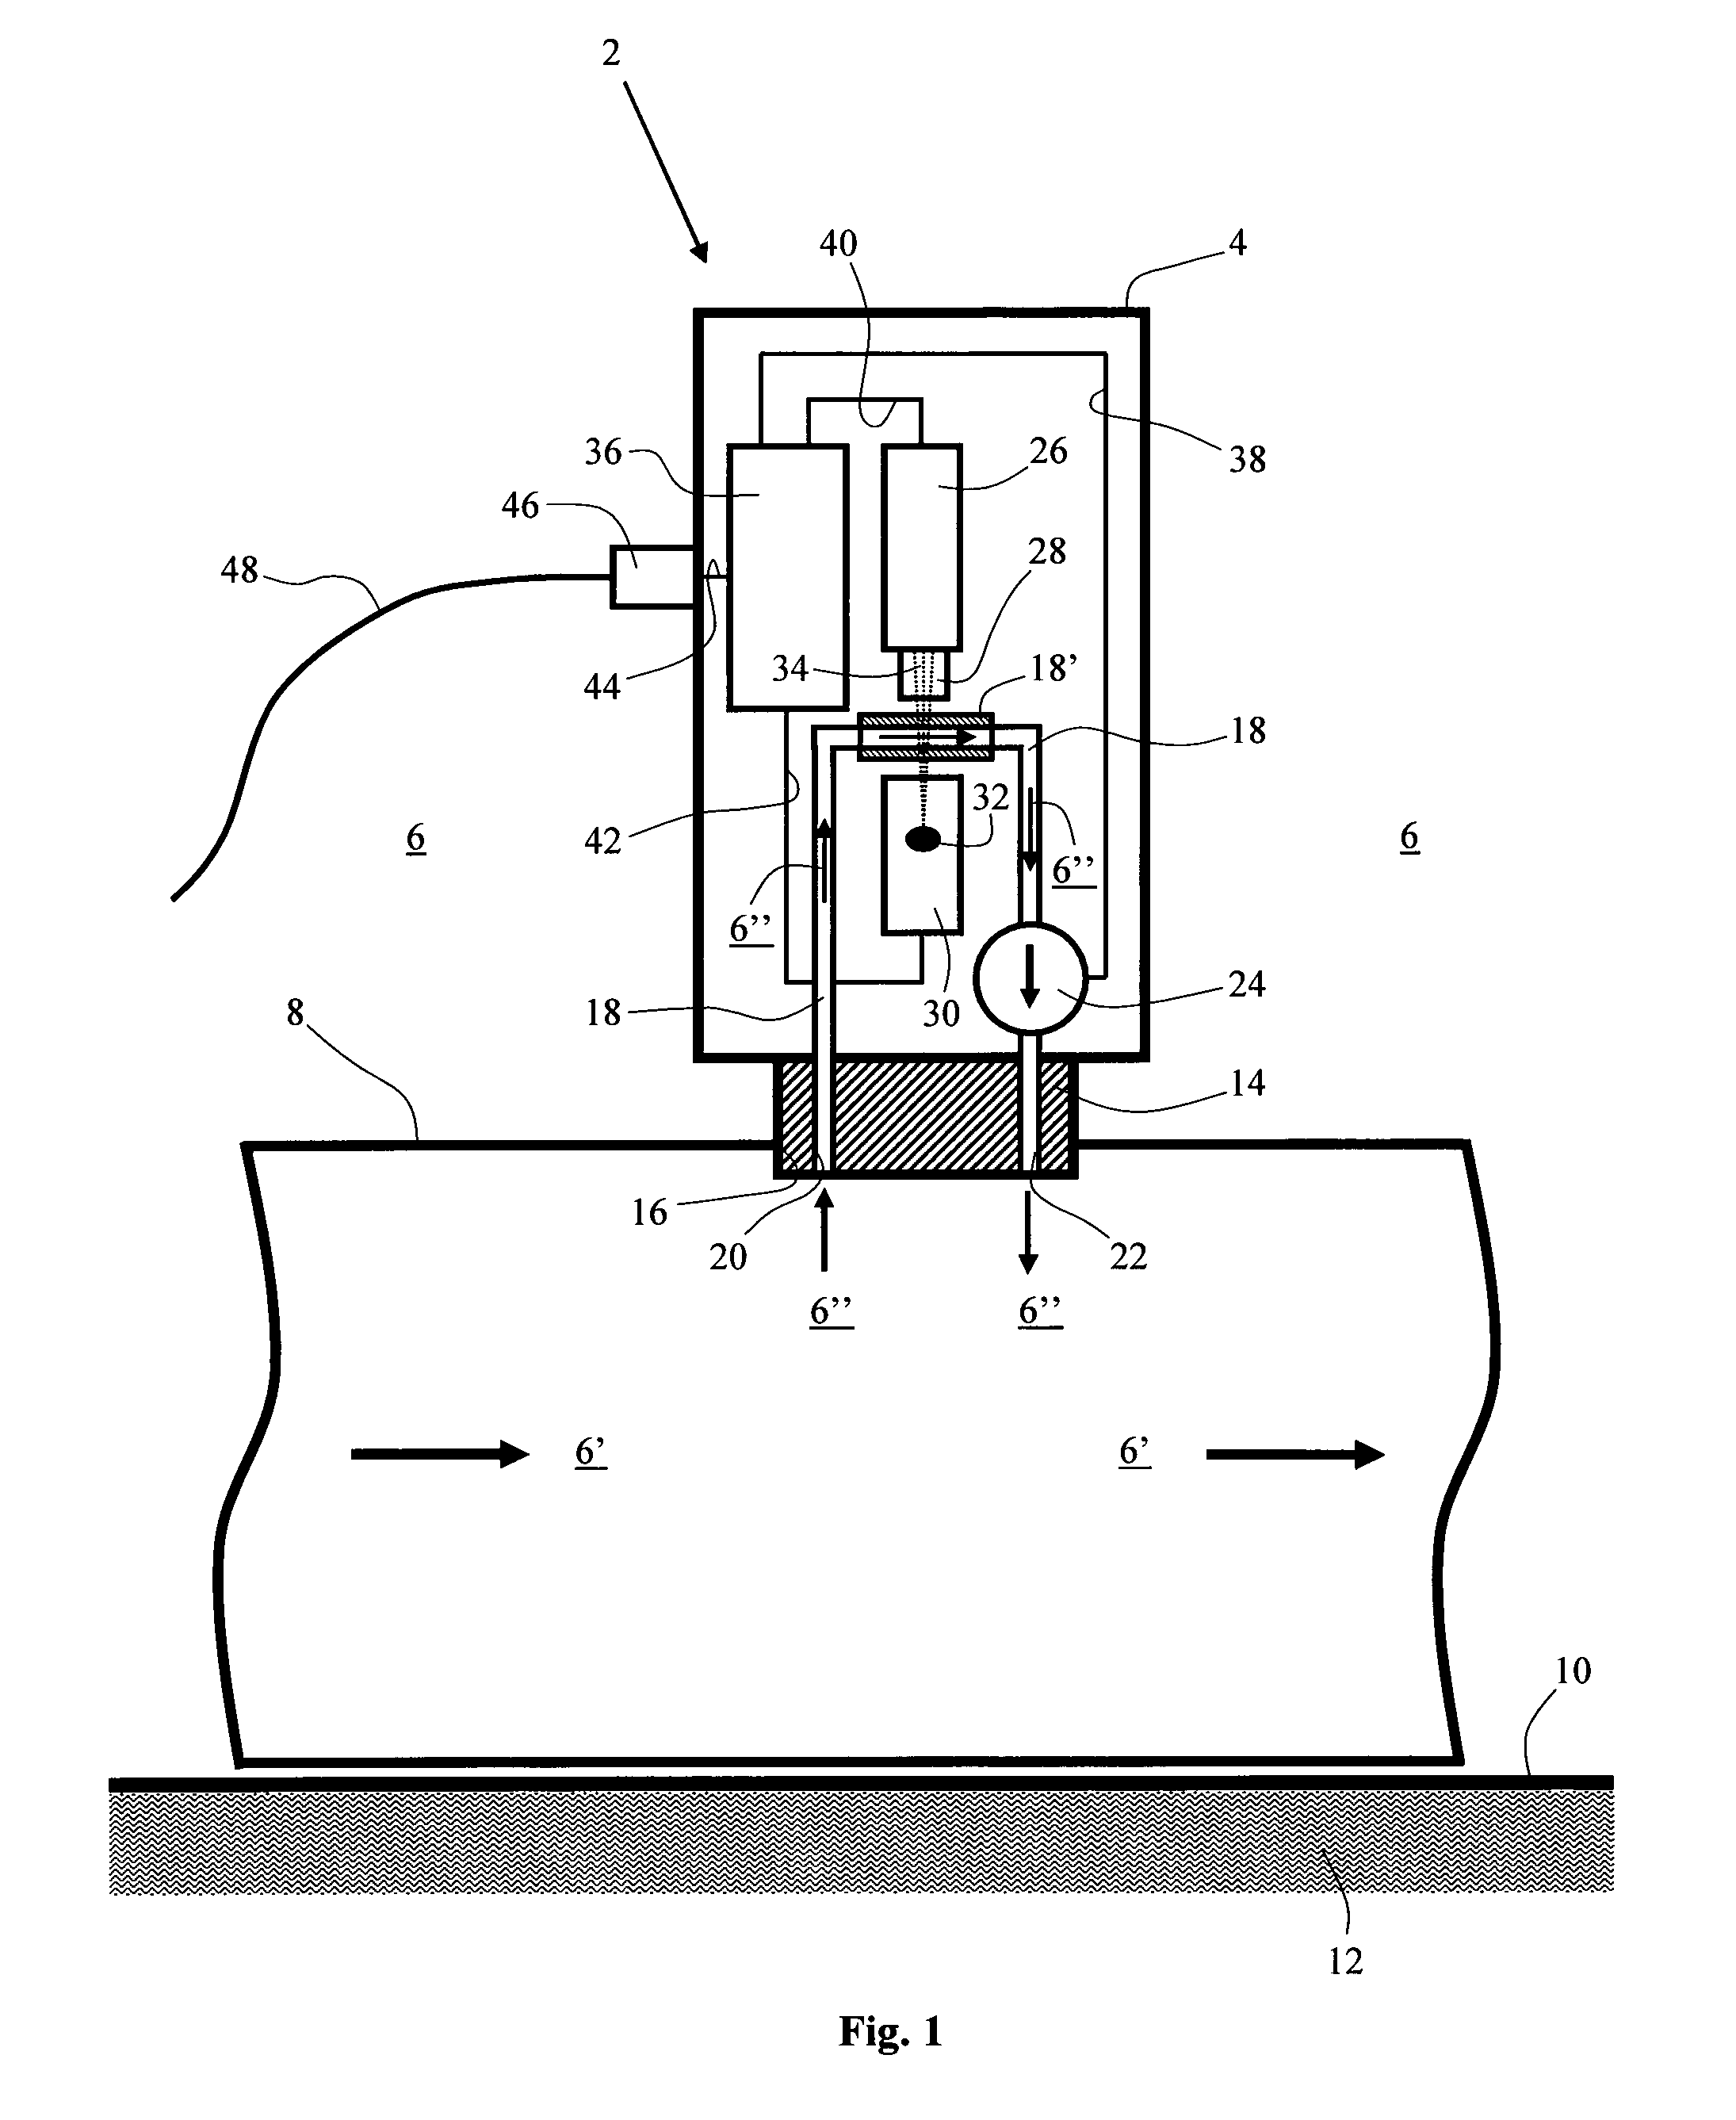 Technical System, Method and Use for Online Measuring and Monitoring of the Particle Contents in a Flow of Injection Water in an Underwater Line